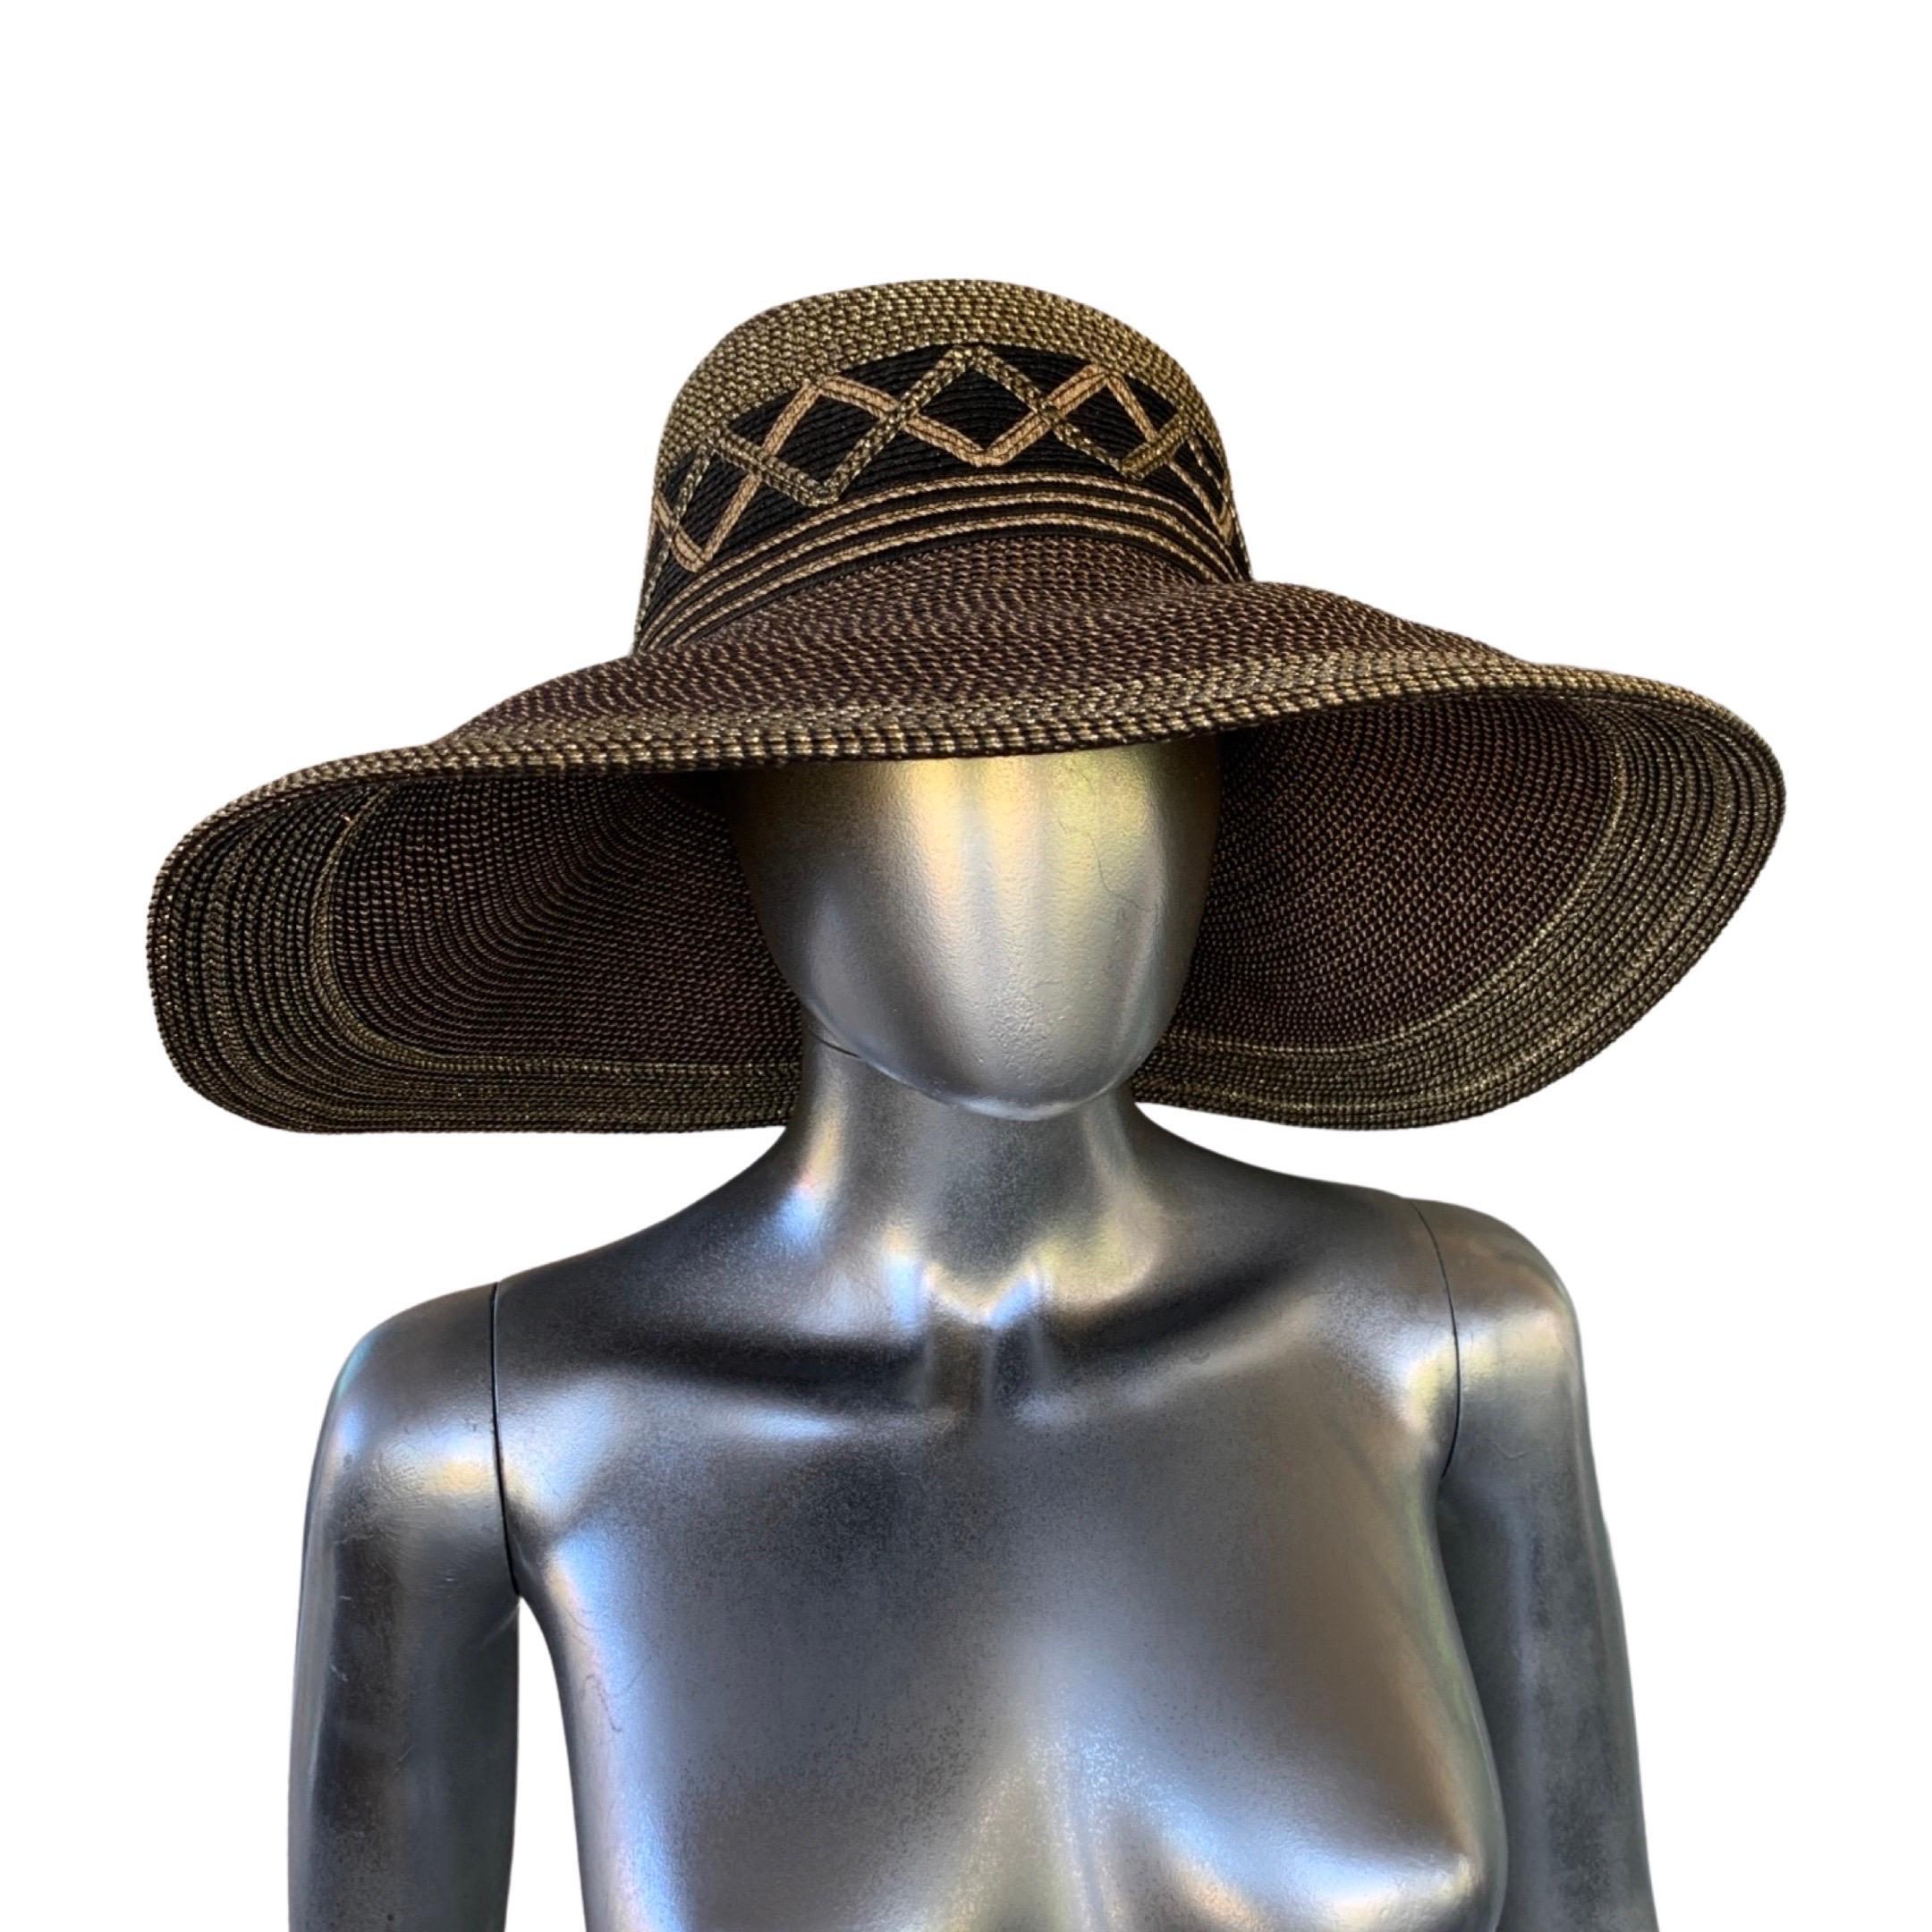 A vintage hat from NY Design legend Eric Javits. This is one of his famous “squichee” hat, which is desired by women all over the world. The bronze and black style was sold out everywhere. Very chic and glamorous. The large hat frames the face, with